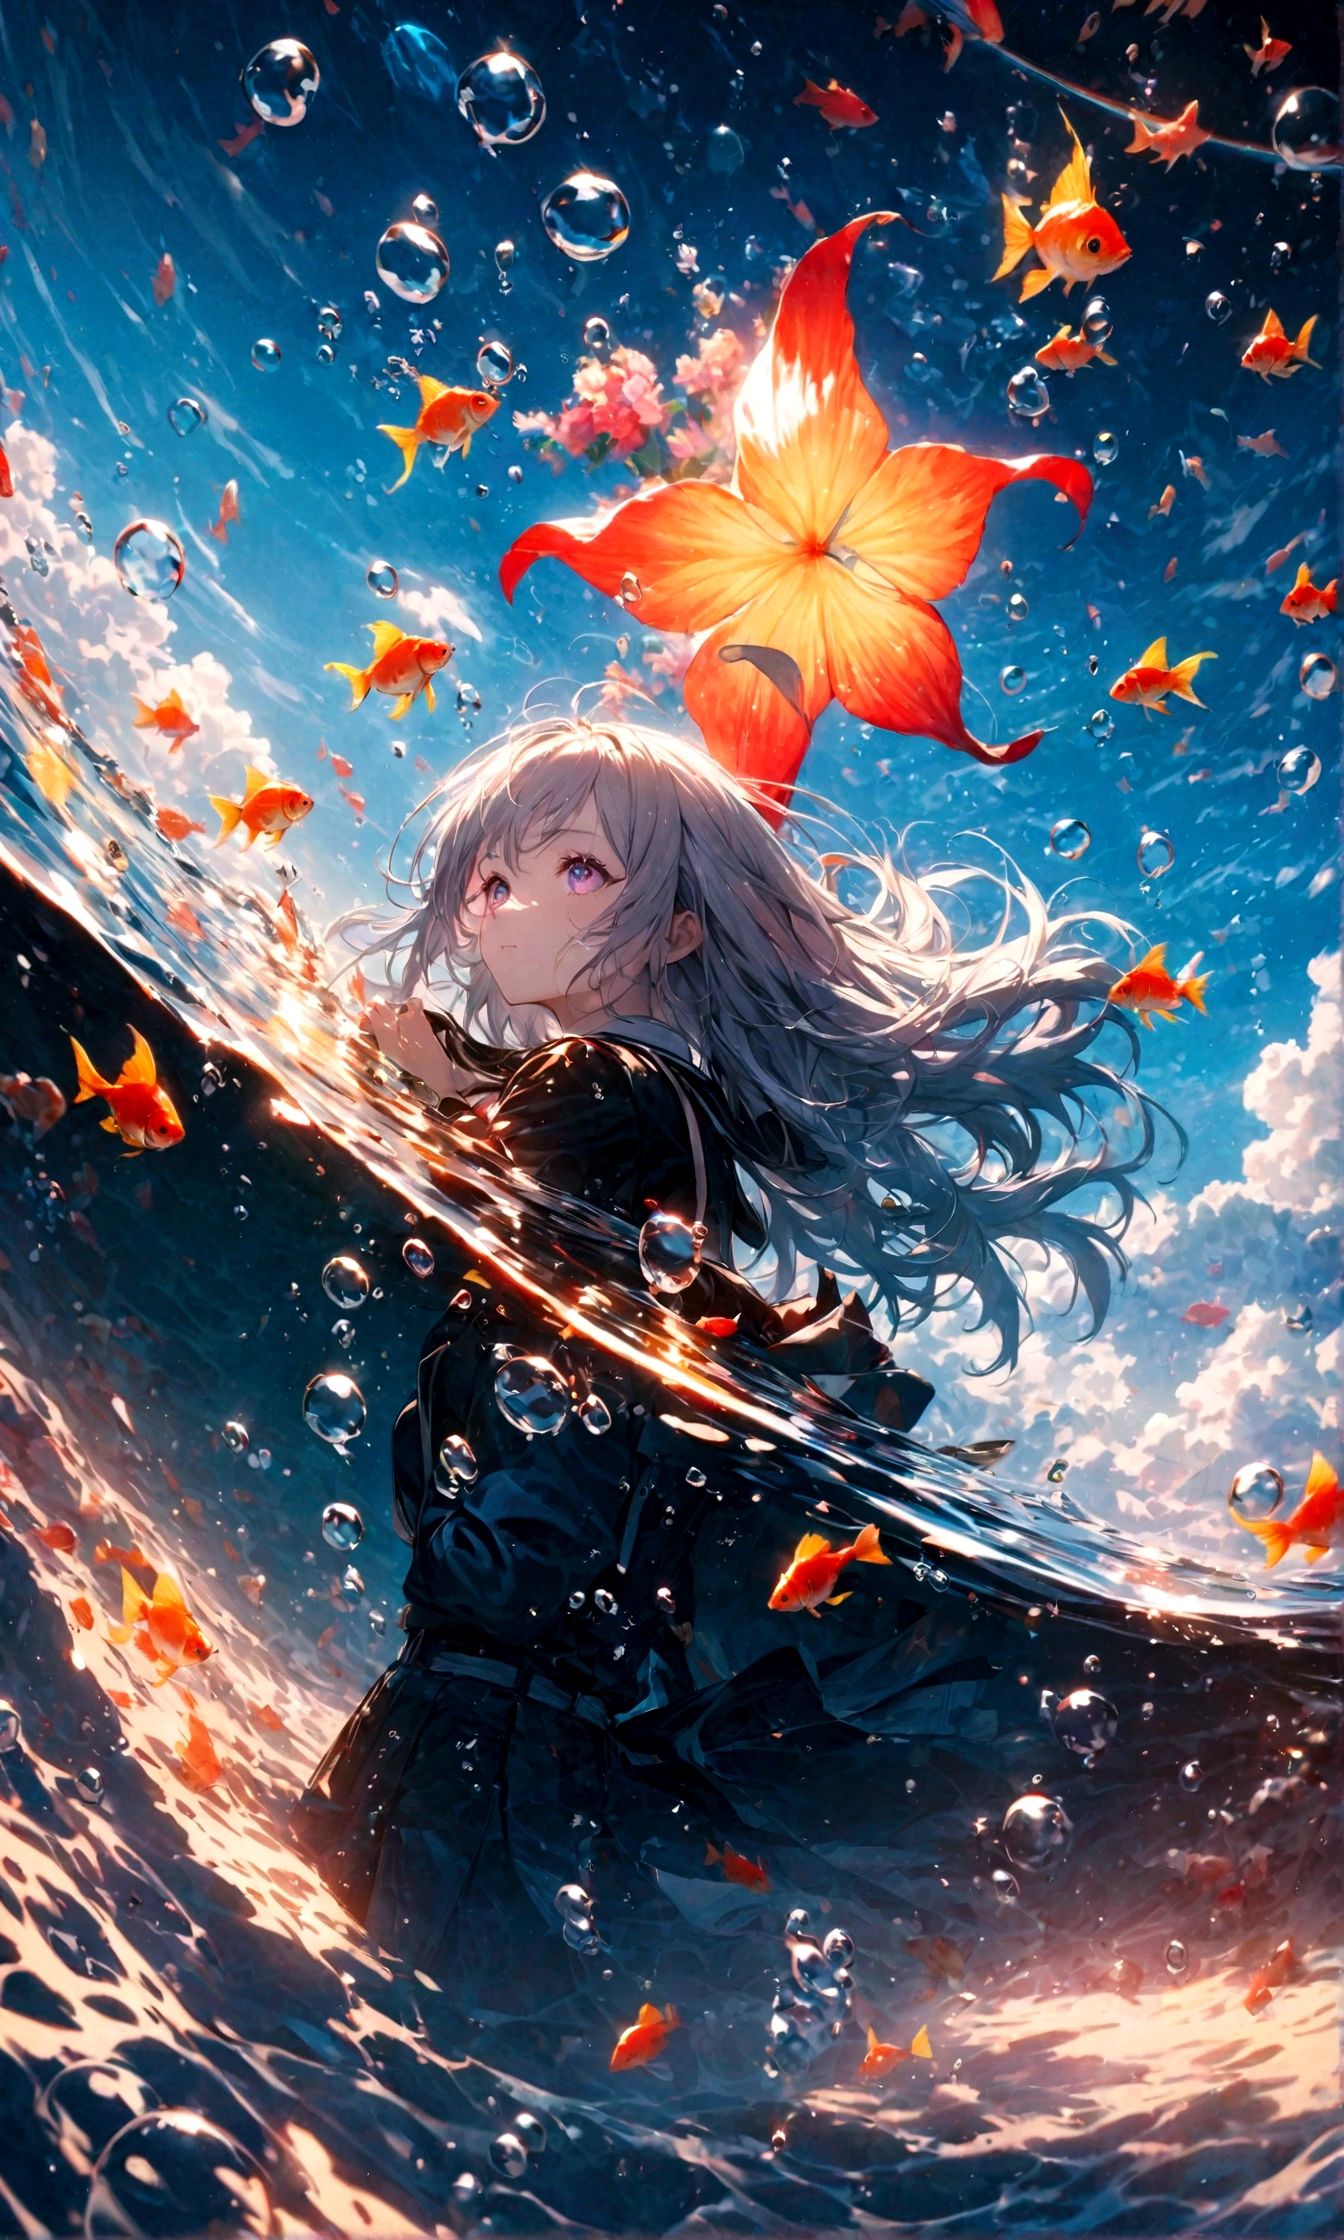 (female\(student, age of 15, JK, short silver floating hair, cosmic colored eyes, black color uniform of school, pale skin, tired face with no shine in the eyes\) is looking up at the sky), (so many goldfish are swimming in the air), beautiful sky, beautiful clouds, summery colorful flowers are blooming here and there, (crystal clear bubbles as if underwater are shining prism here and there in the sky), there is the noonday moon and noonday stars in the sky, BREAK ,quality\(8k,wallpaper of extremely detailed CG unit, ​masterpiece,hight resolution,top-quality,top-quality real texture skin,hyper realisitic,increase the resolution,RAW photos,best qualtiy,highly detailed,the wallpaper,cinematic lighting,ray trace,golden ratio\),long shot